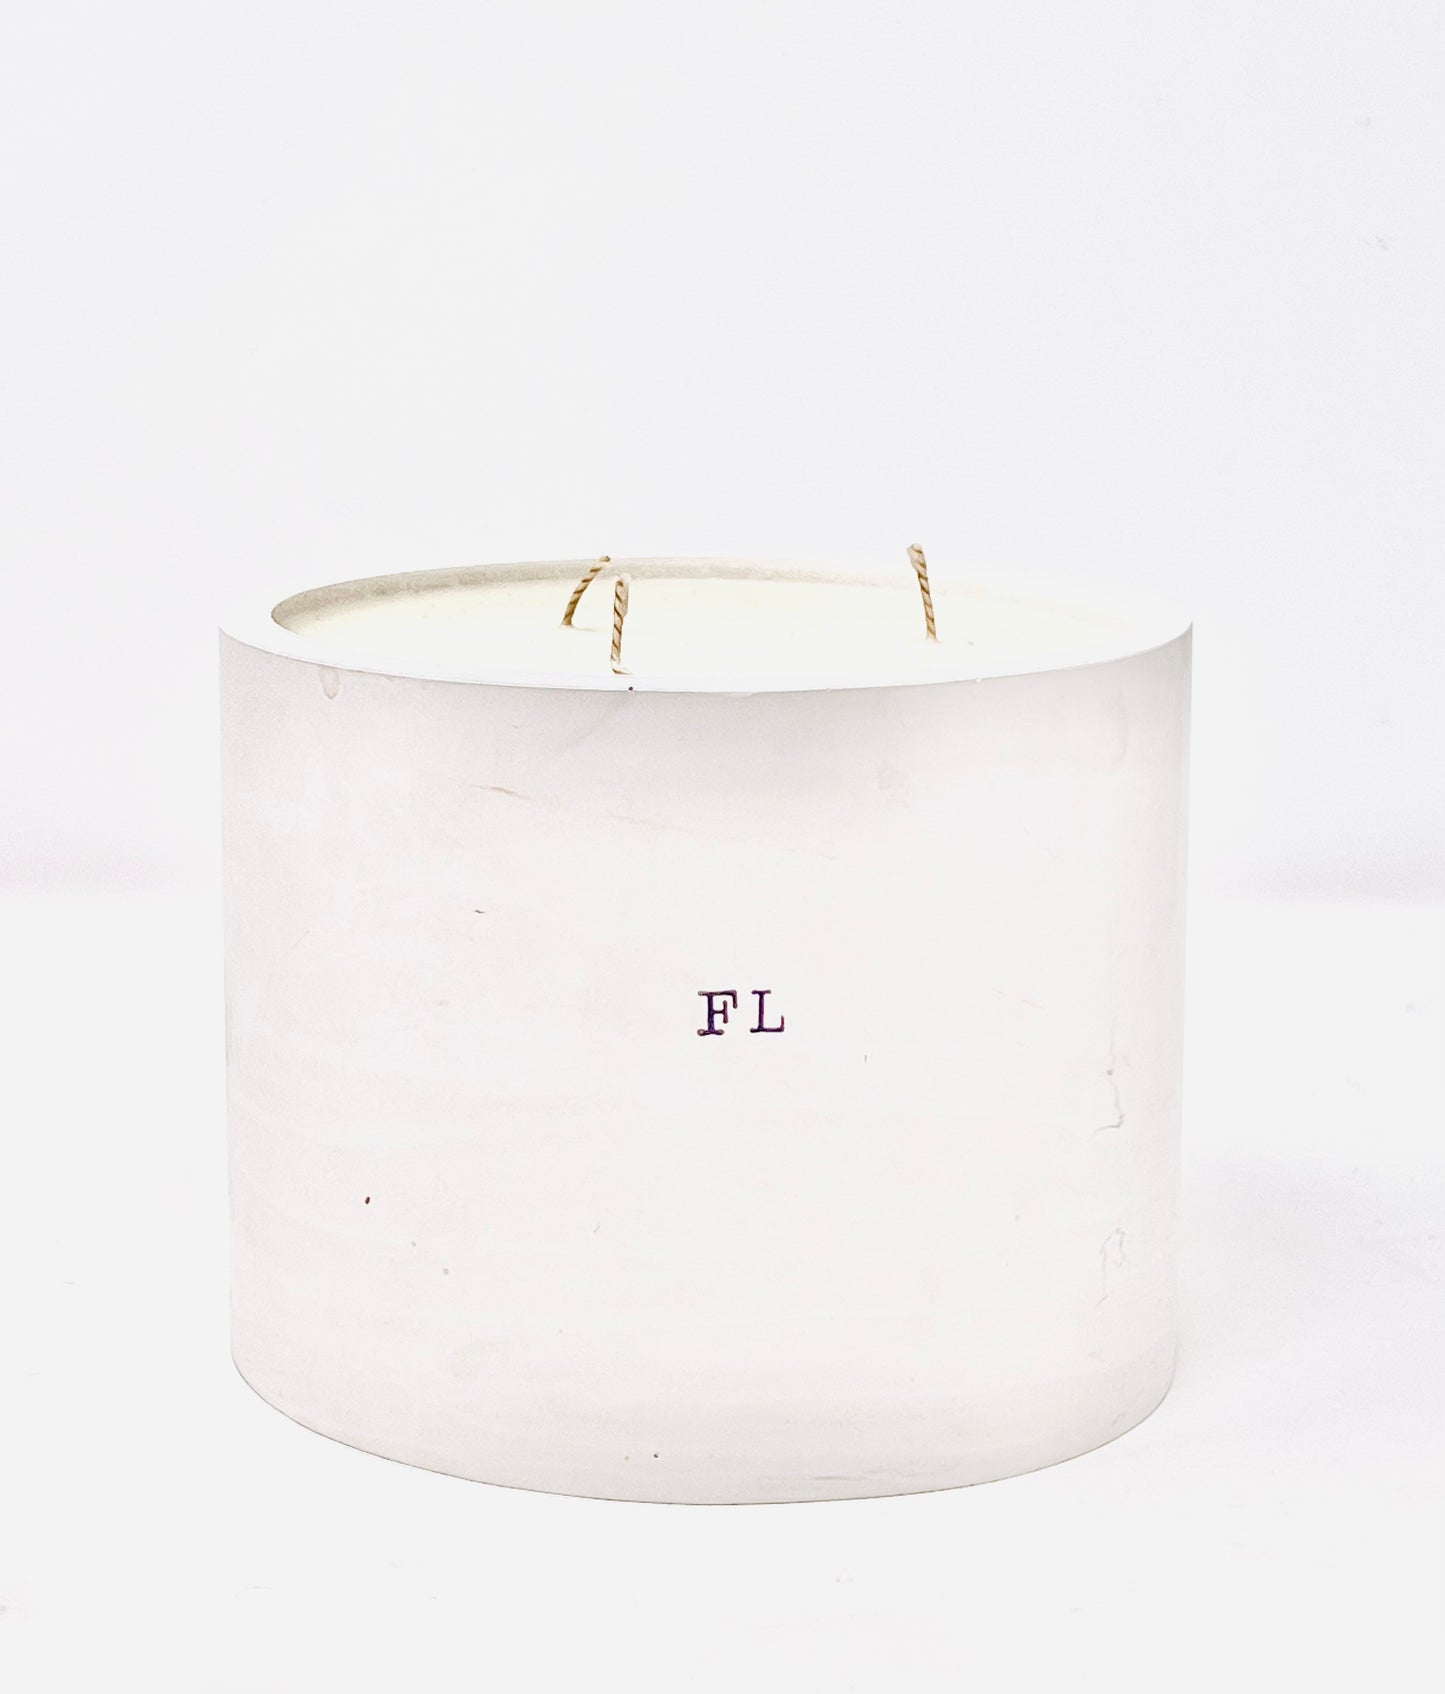 Mom Life Soy Candle, Slow Burn Candle